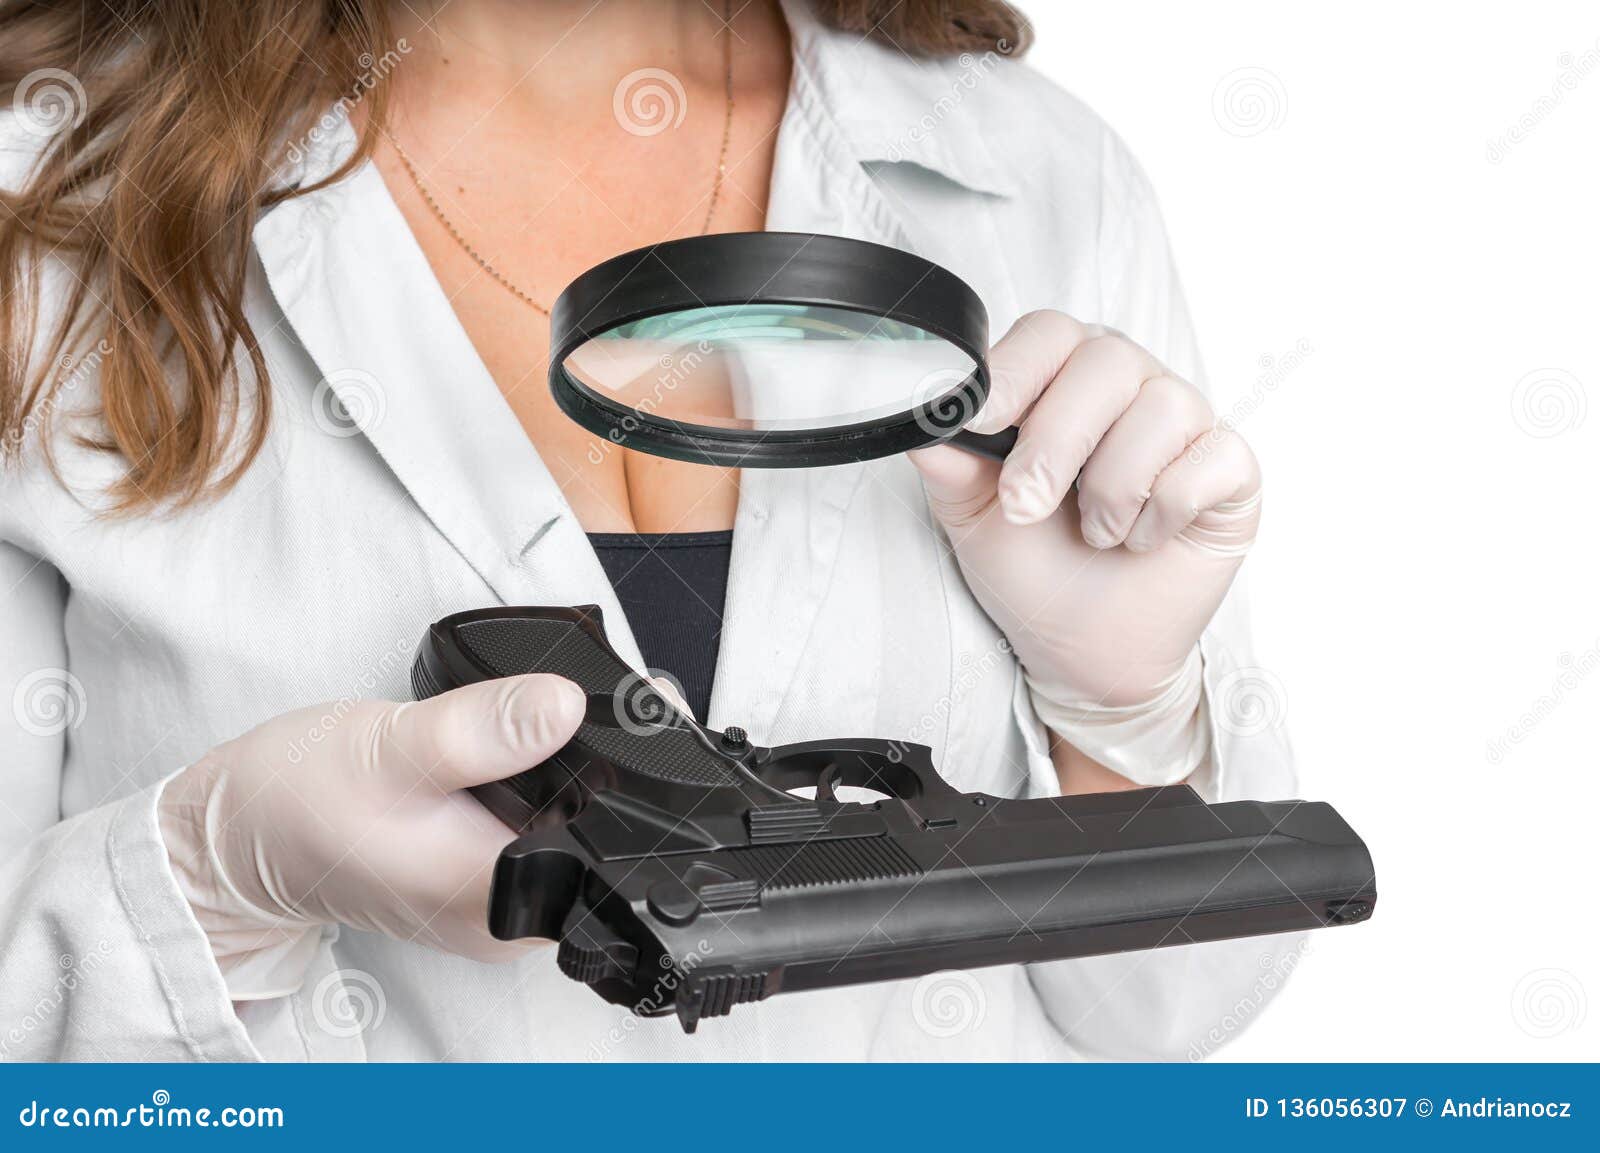 criminology expert looking at pistol and collects evidence